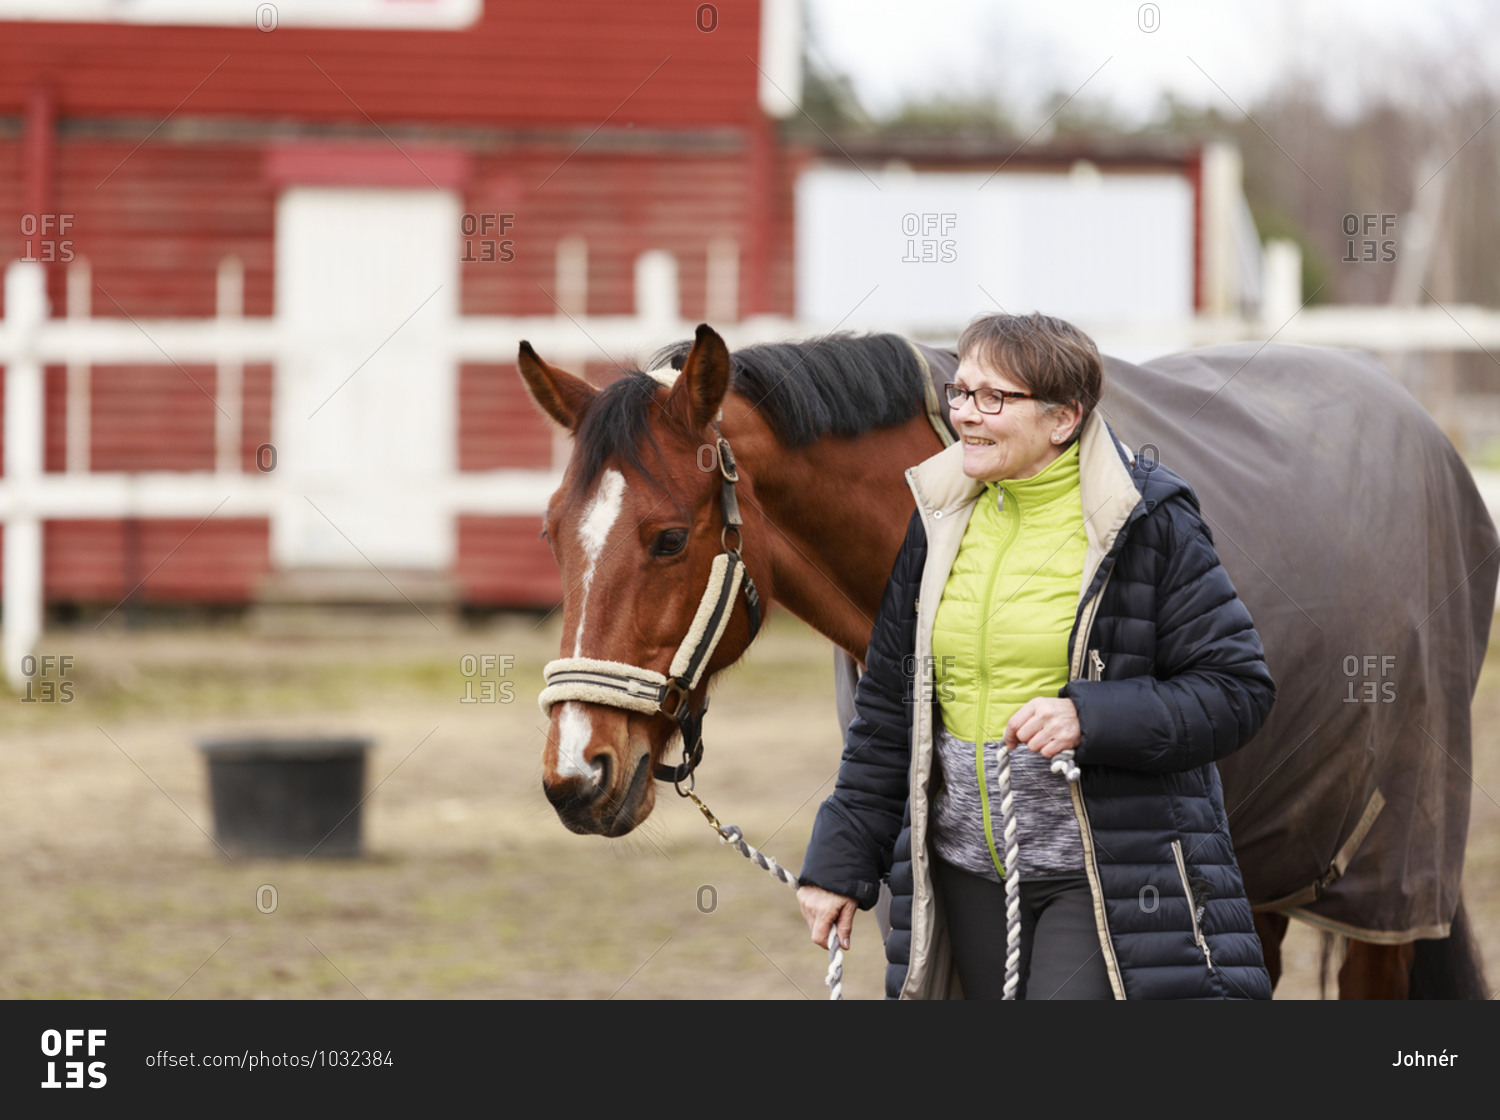 Smiling woman with horse